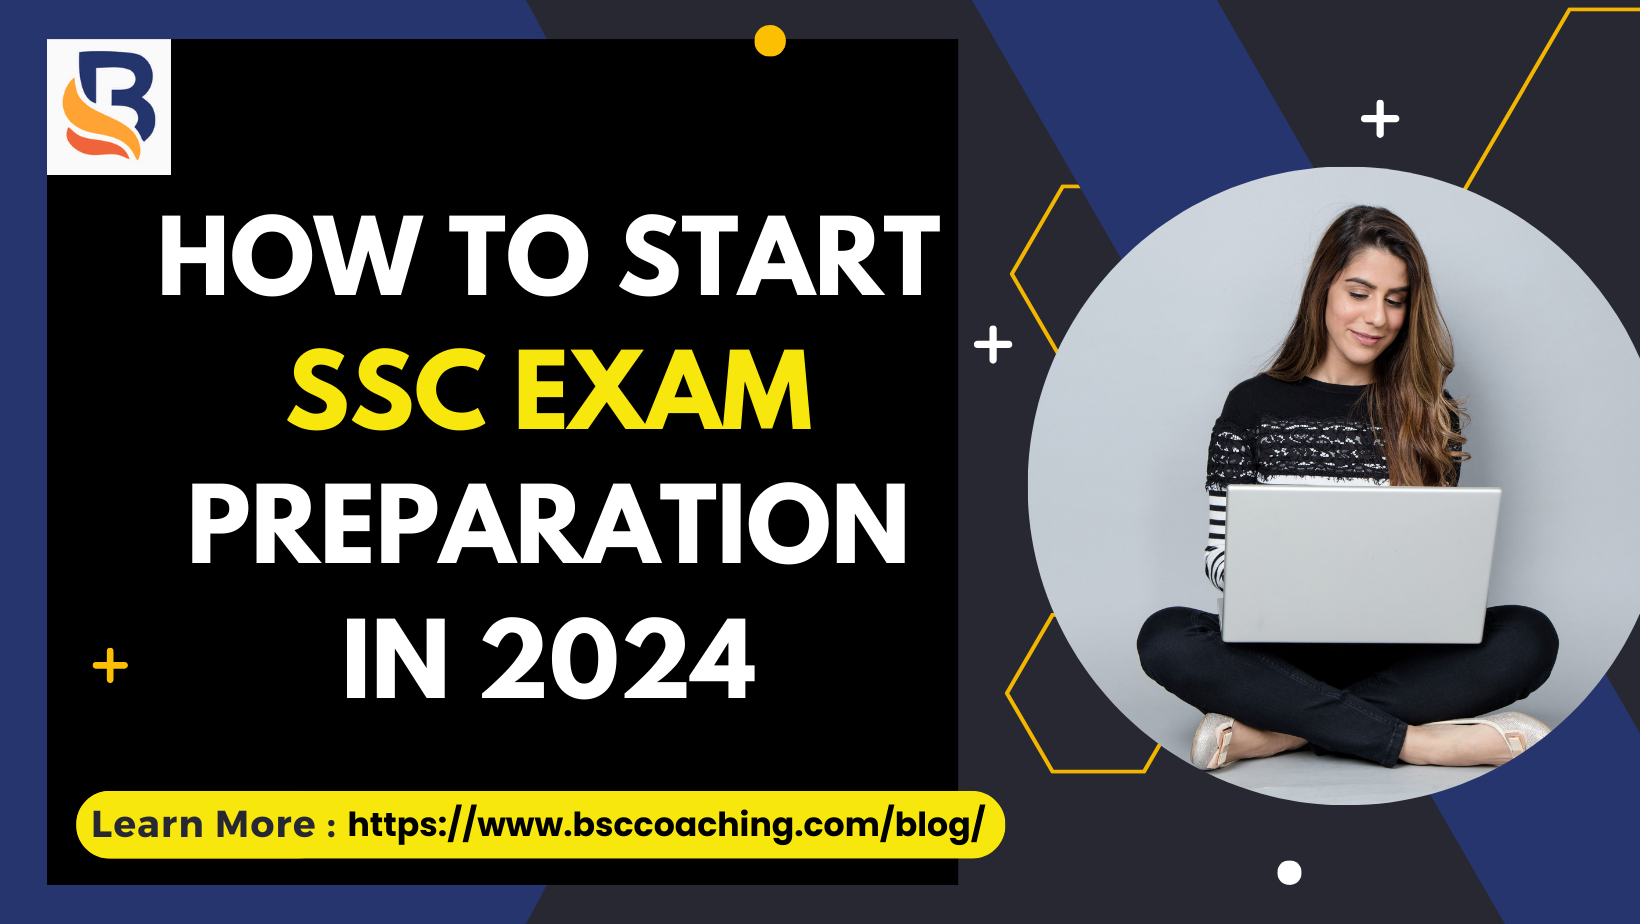 How To Start SSC Exam Preparation in 2024